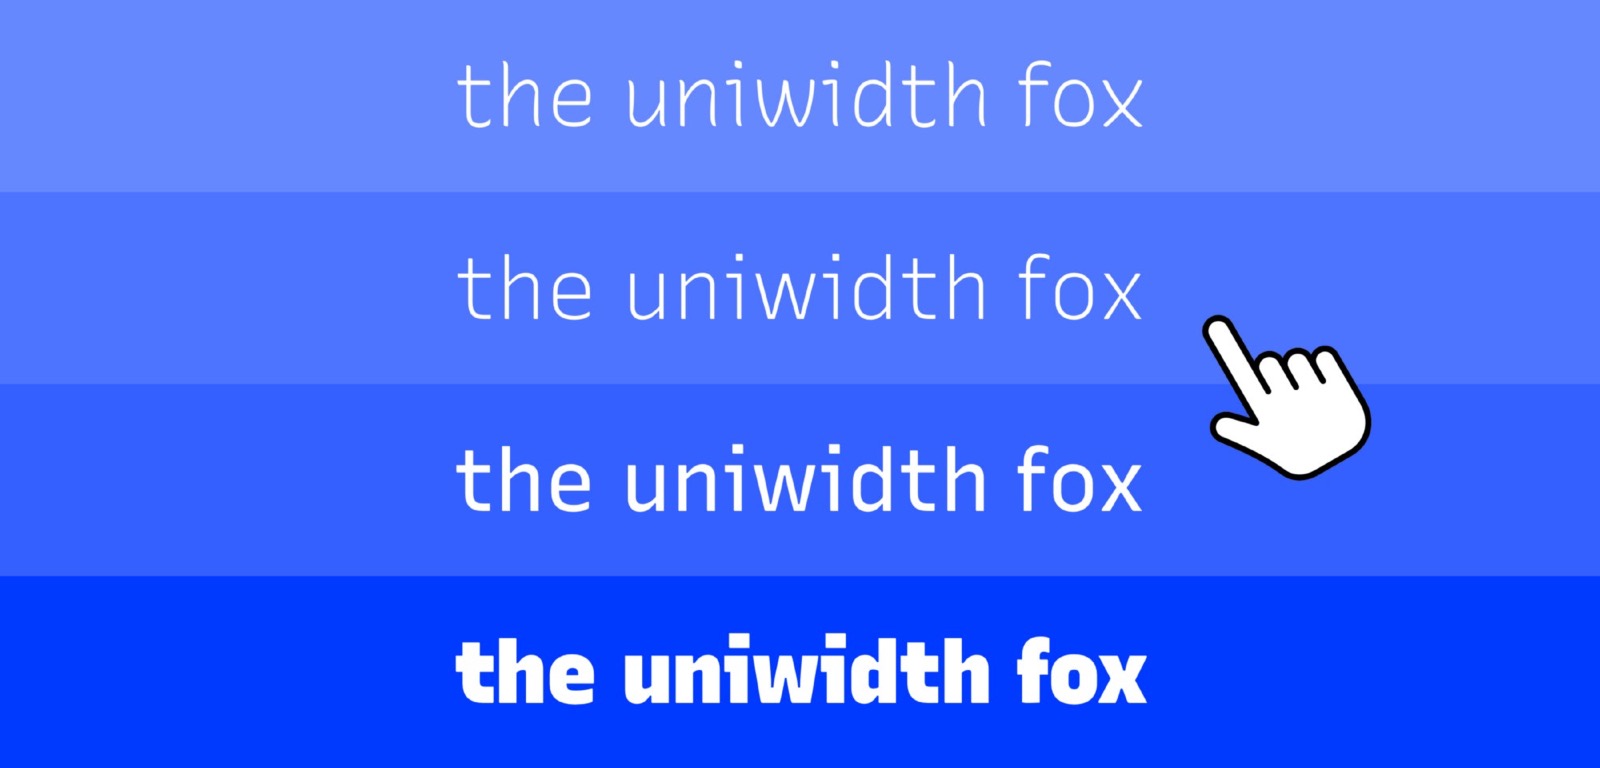 More information about "Uniwidth typefaces for interface design"